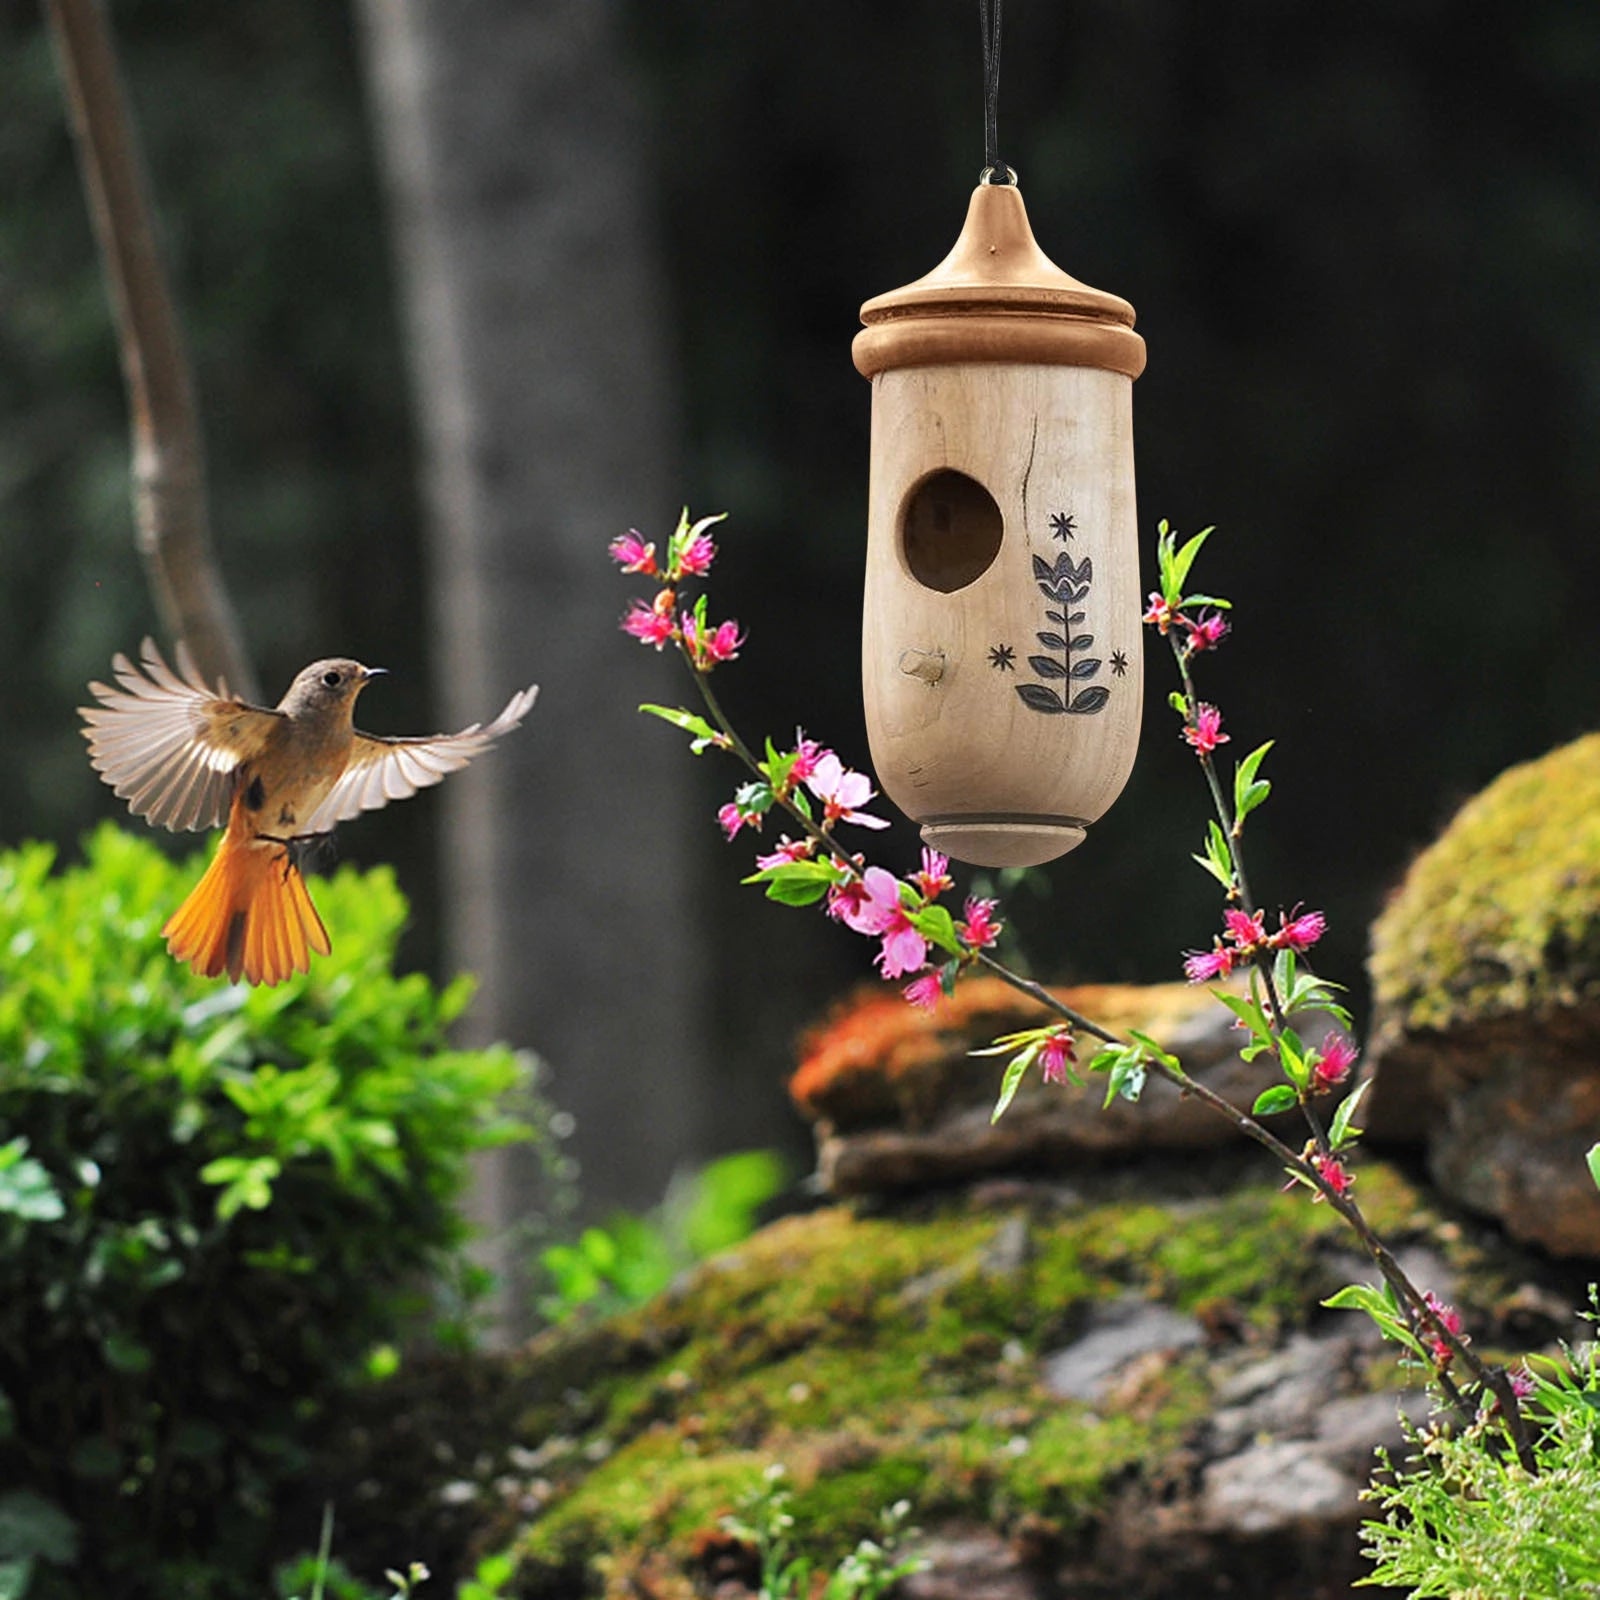 (Last Day Promotion - 50% OFF) Wooden Hummingbird House, BUY 2 FREE SHIPPING